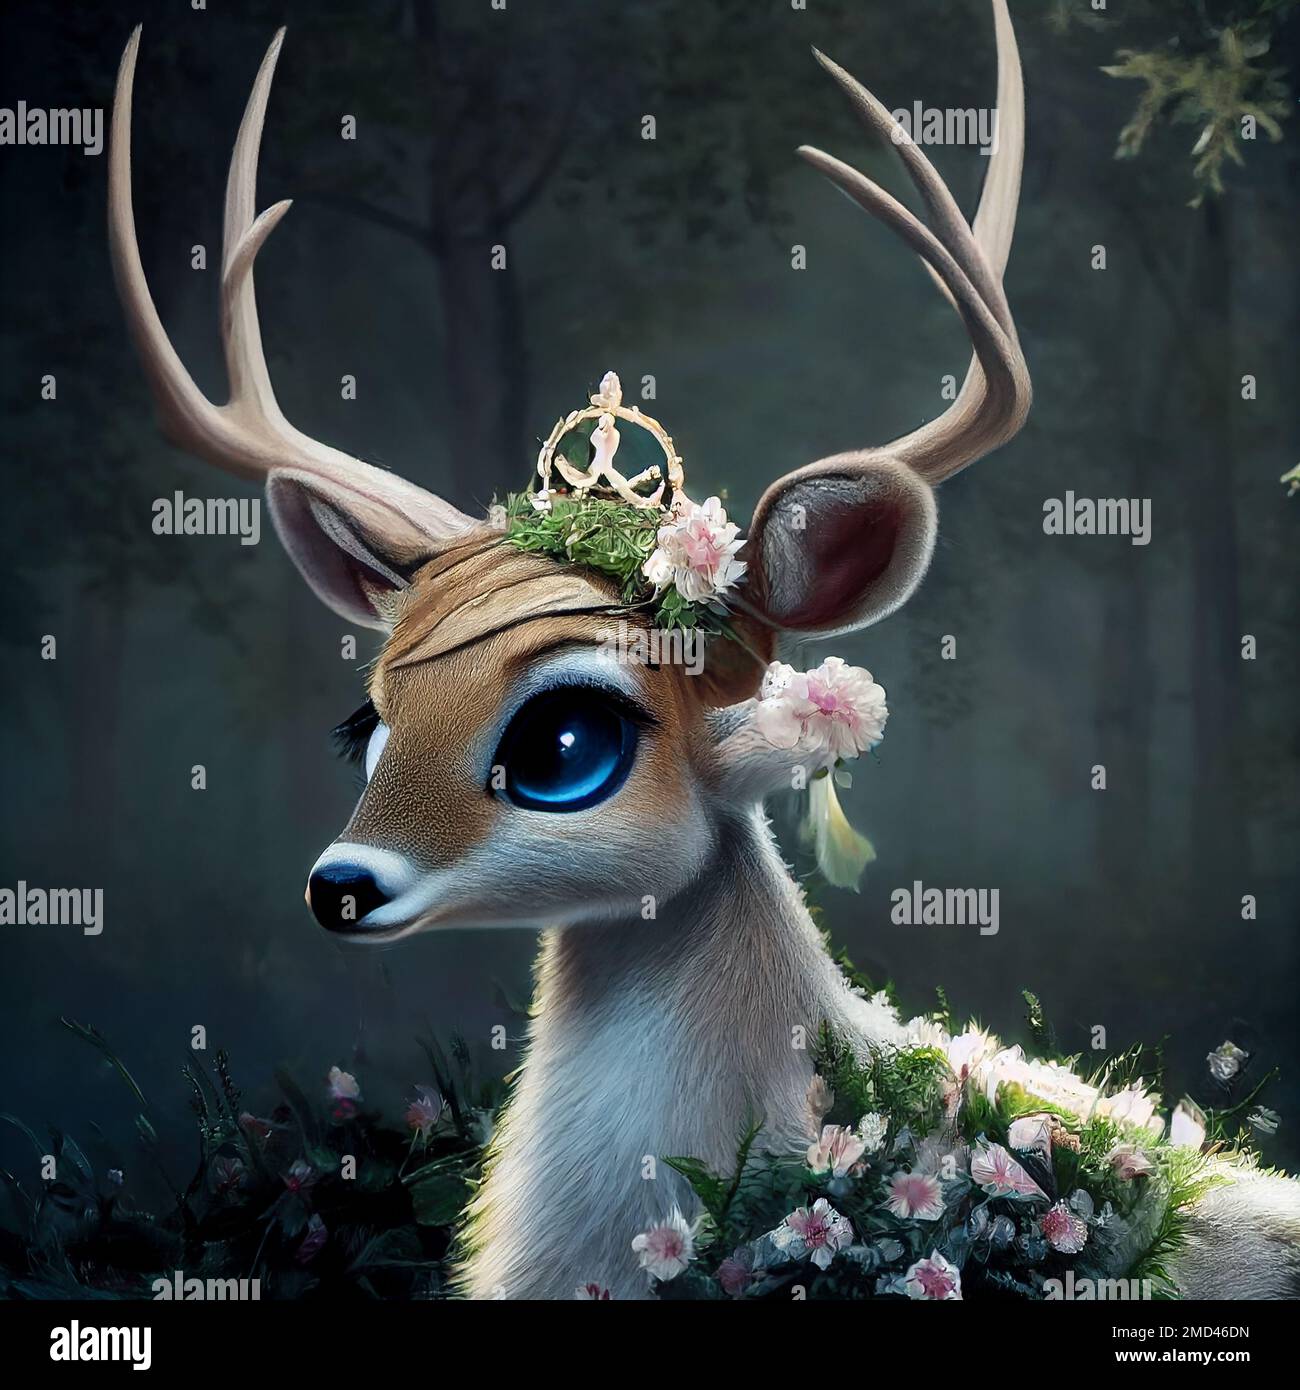 Illustration of a cute deer in forest Stock Photo